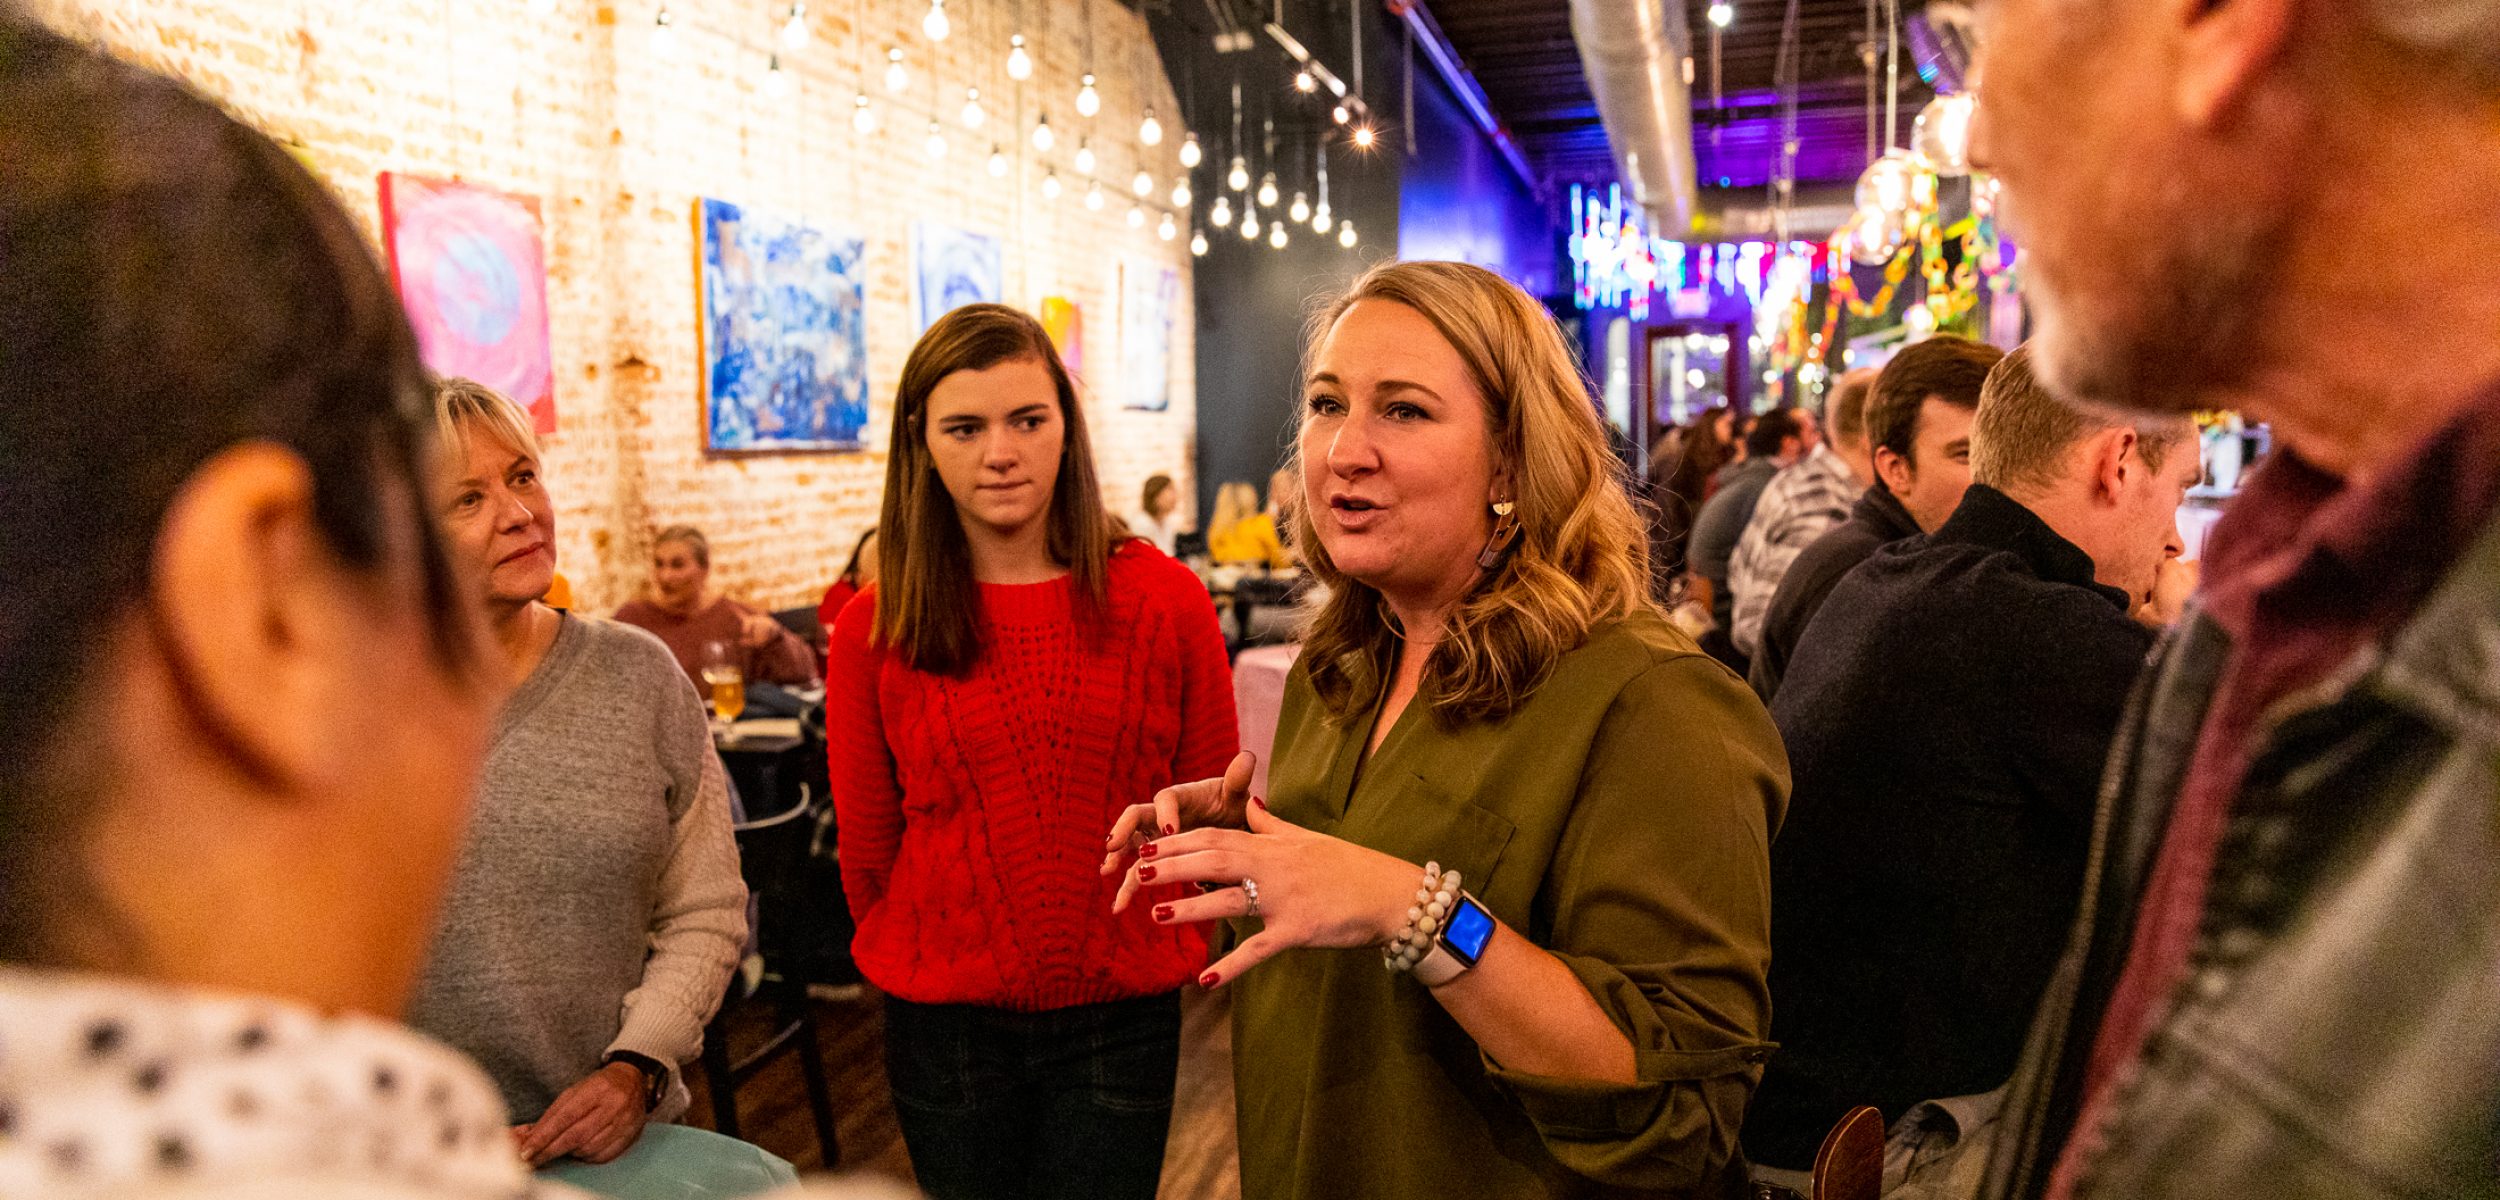 People First Tourism is a Raleigh-based company seeks “a world where travelers develop deep connections with their hosts, are transformed by the genuine local cultures they experience and improve the lives of the people they visit.”